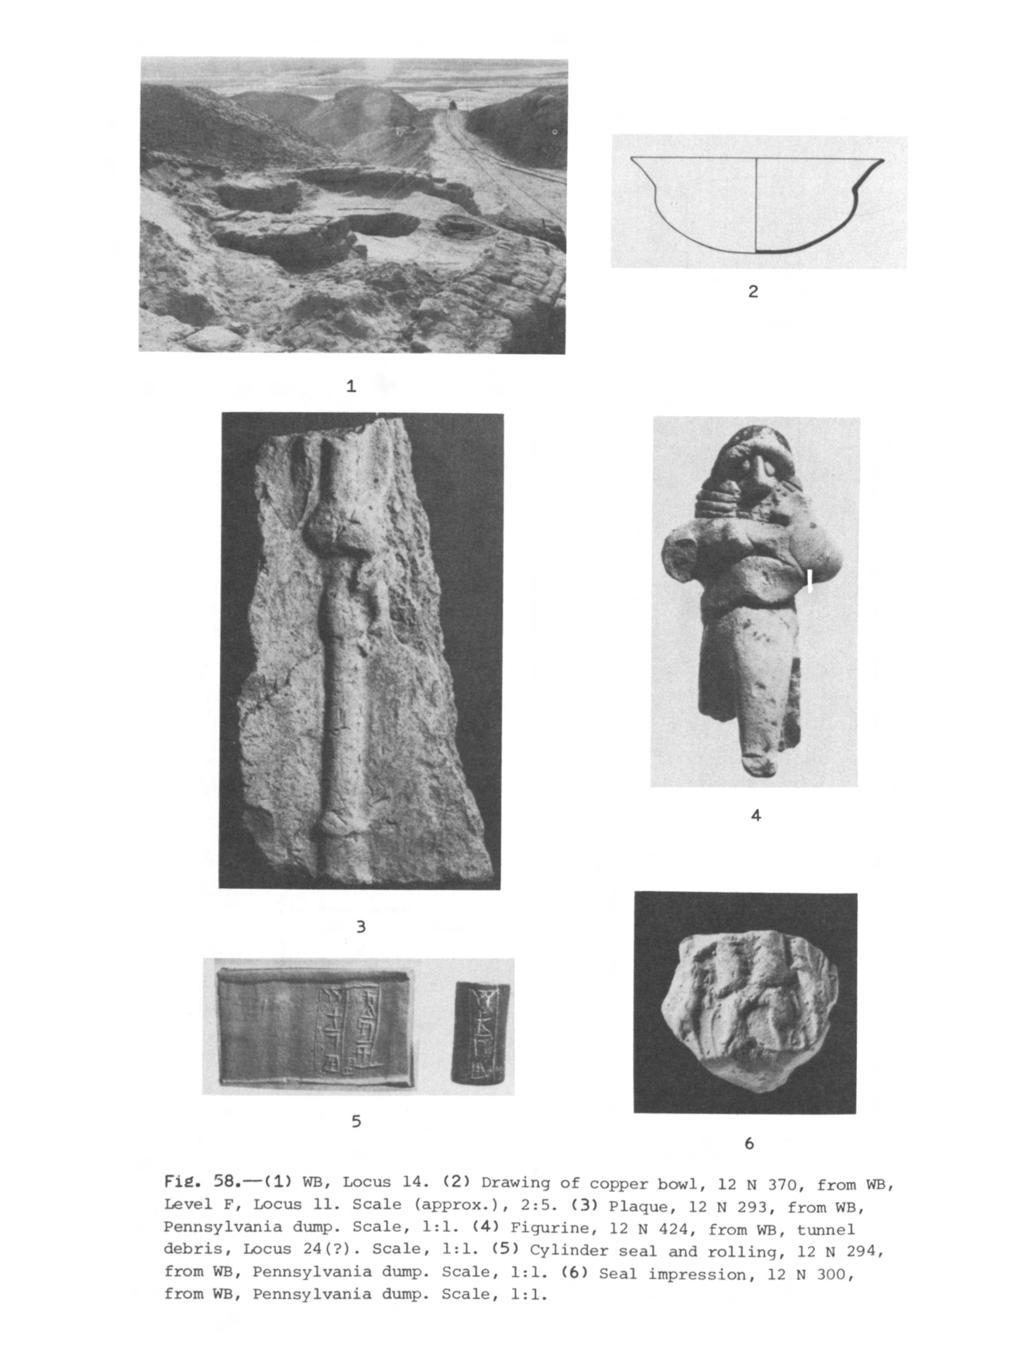 4 Fig. 58.-(1) WB, Locus 14. (2) Drawing of copper bowl, 12 N 370, from WB, Level F, Locus 11. Scale (approx.), 2:5. (3) Plaque, 12 N 293, from WB, Pennsylvania dump. Scale, 1:1.